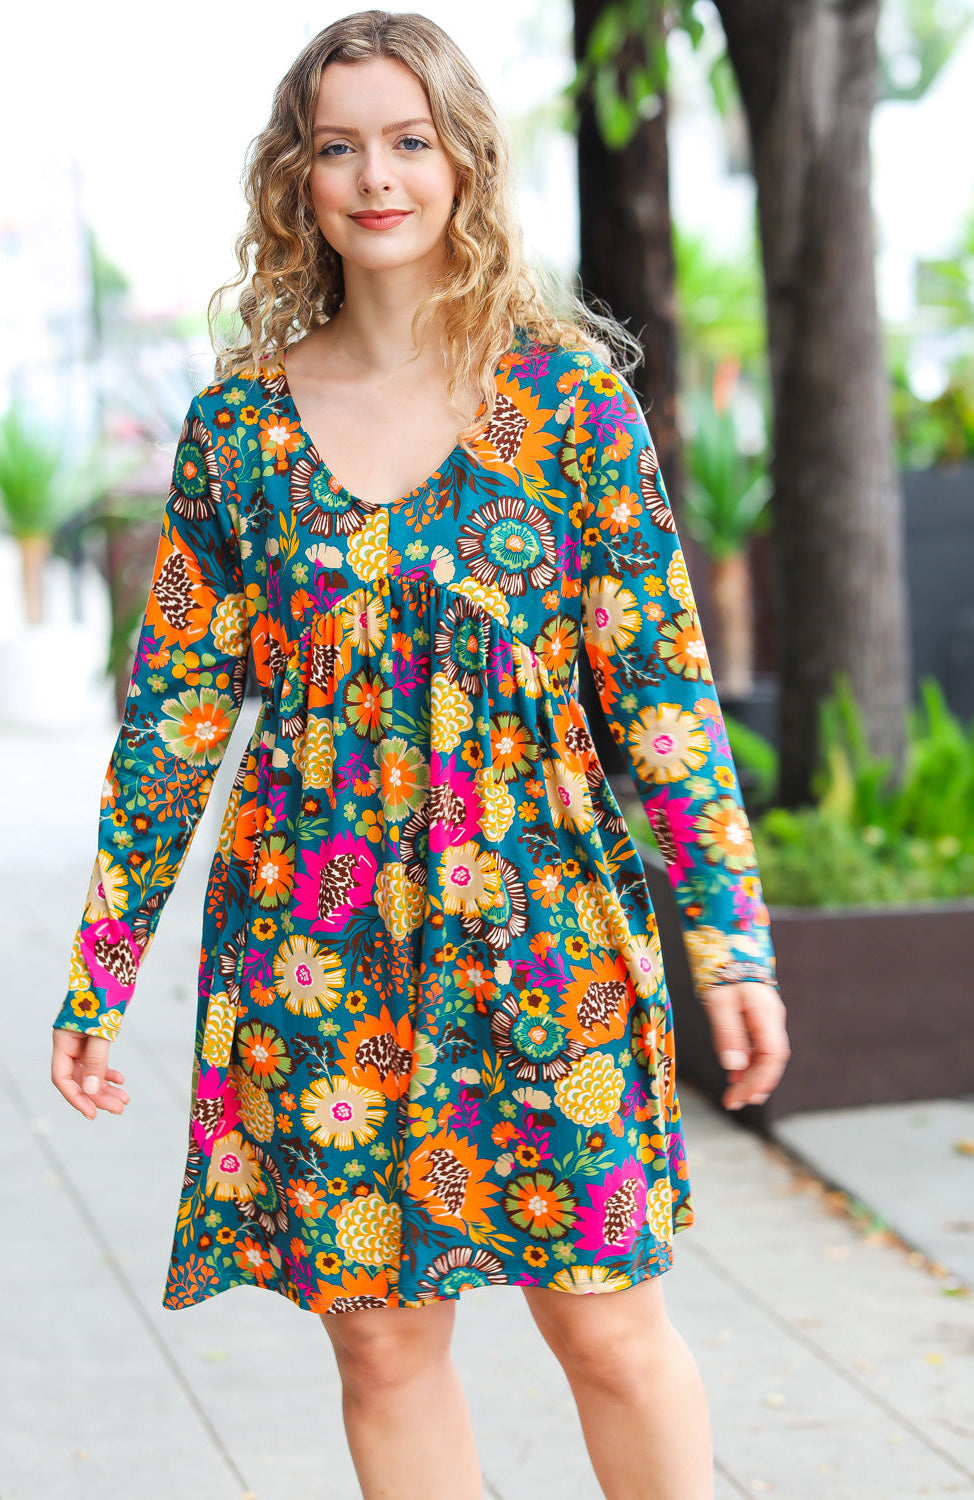 All About It Teal Vibrant Floral Pocketed Dress Haptics